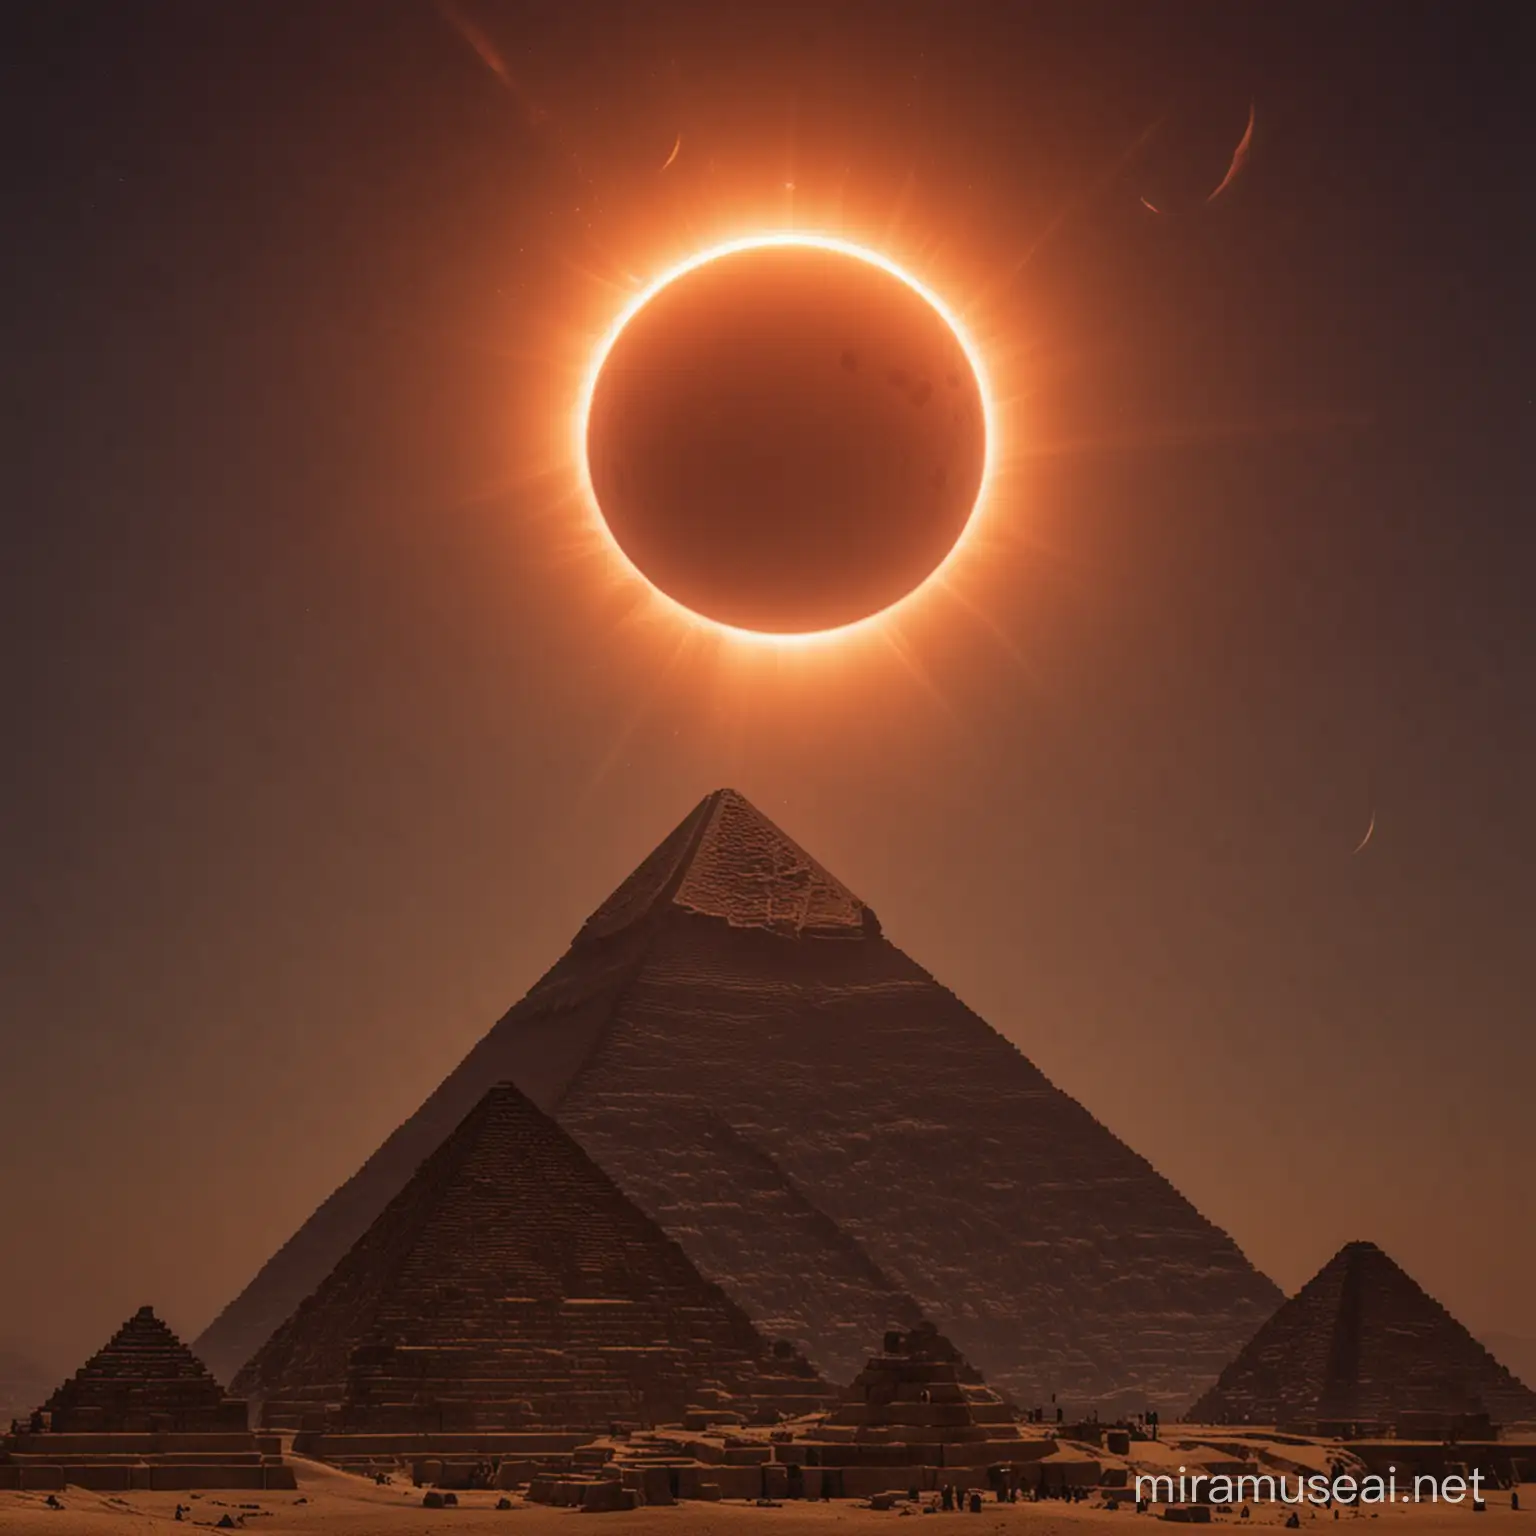 Reddish total solar eclipse over the great pyramid of giza